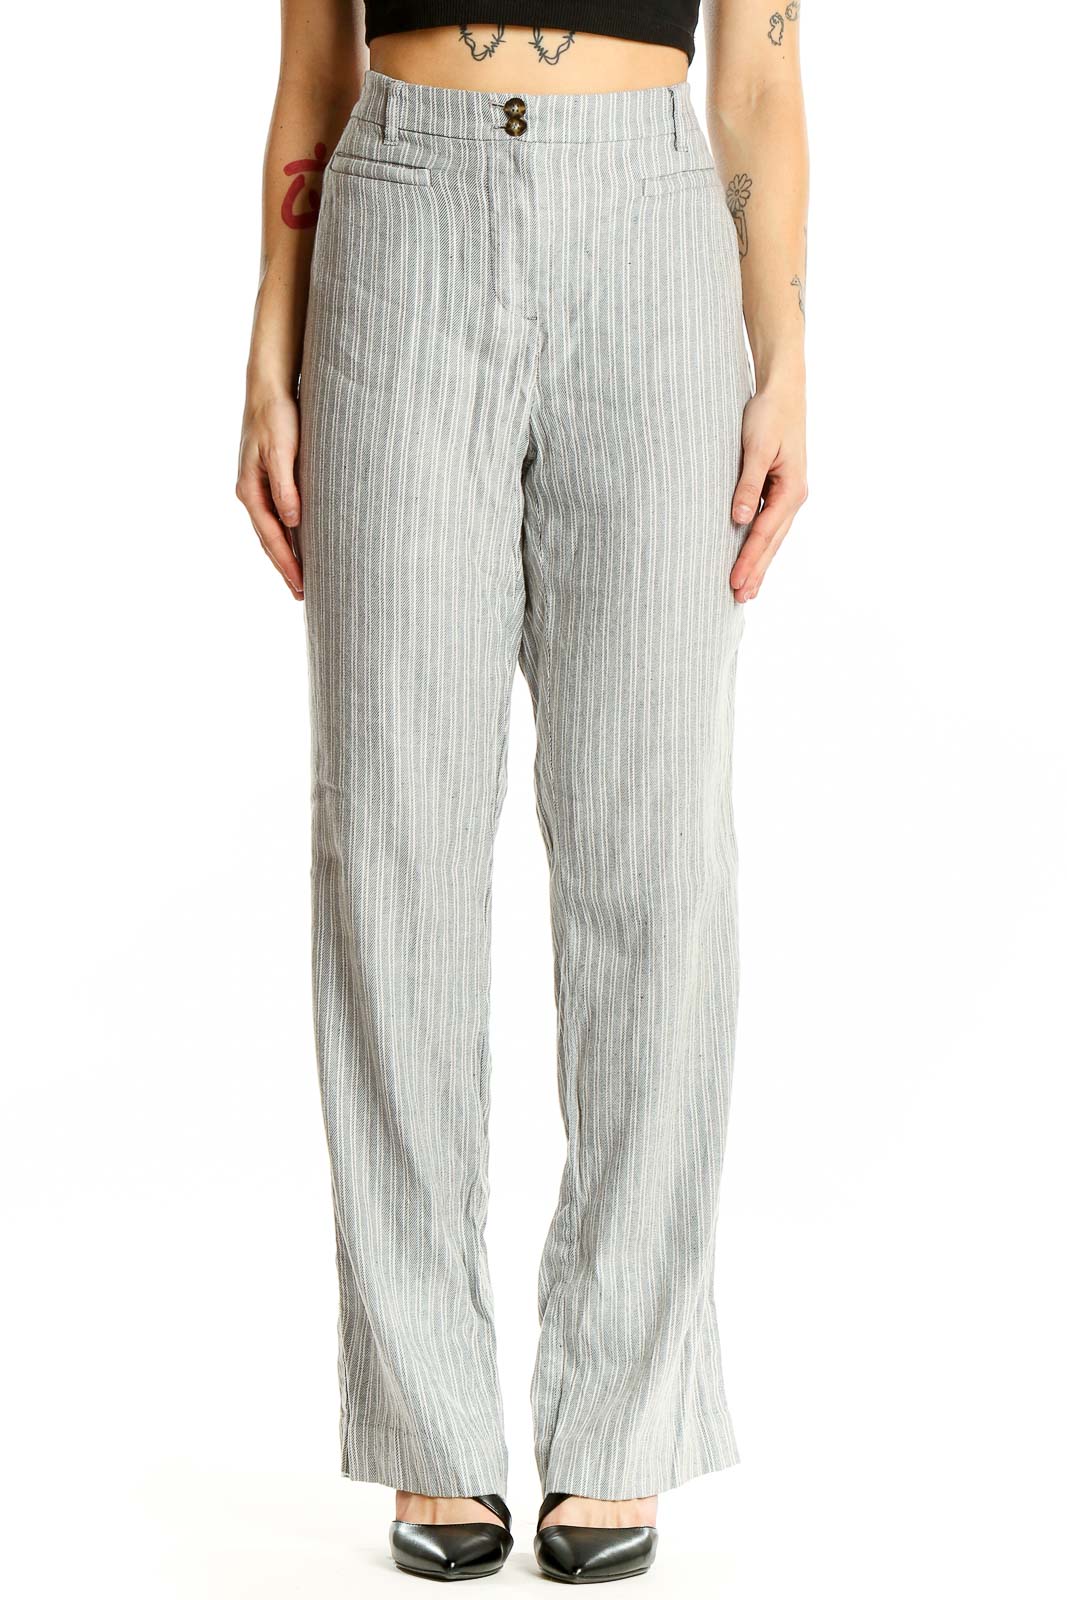 Grey Striped Pants Front